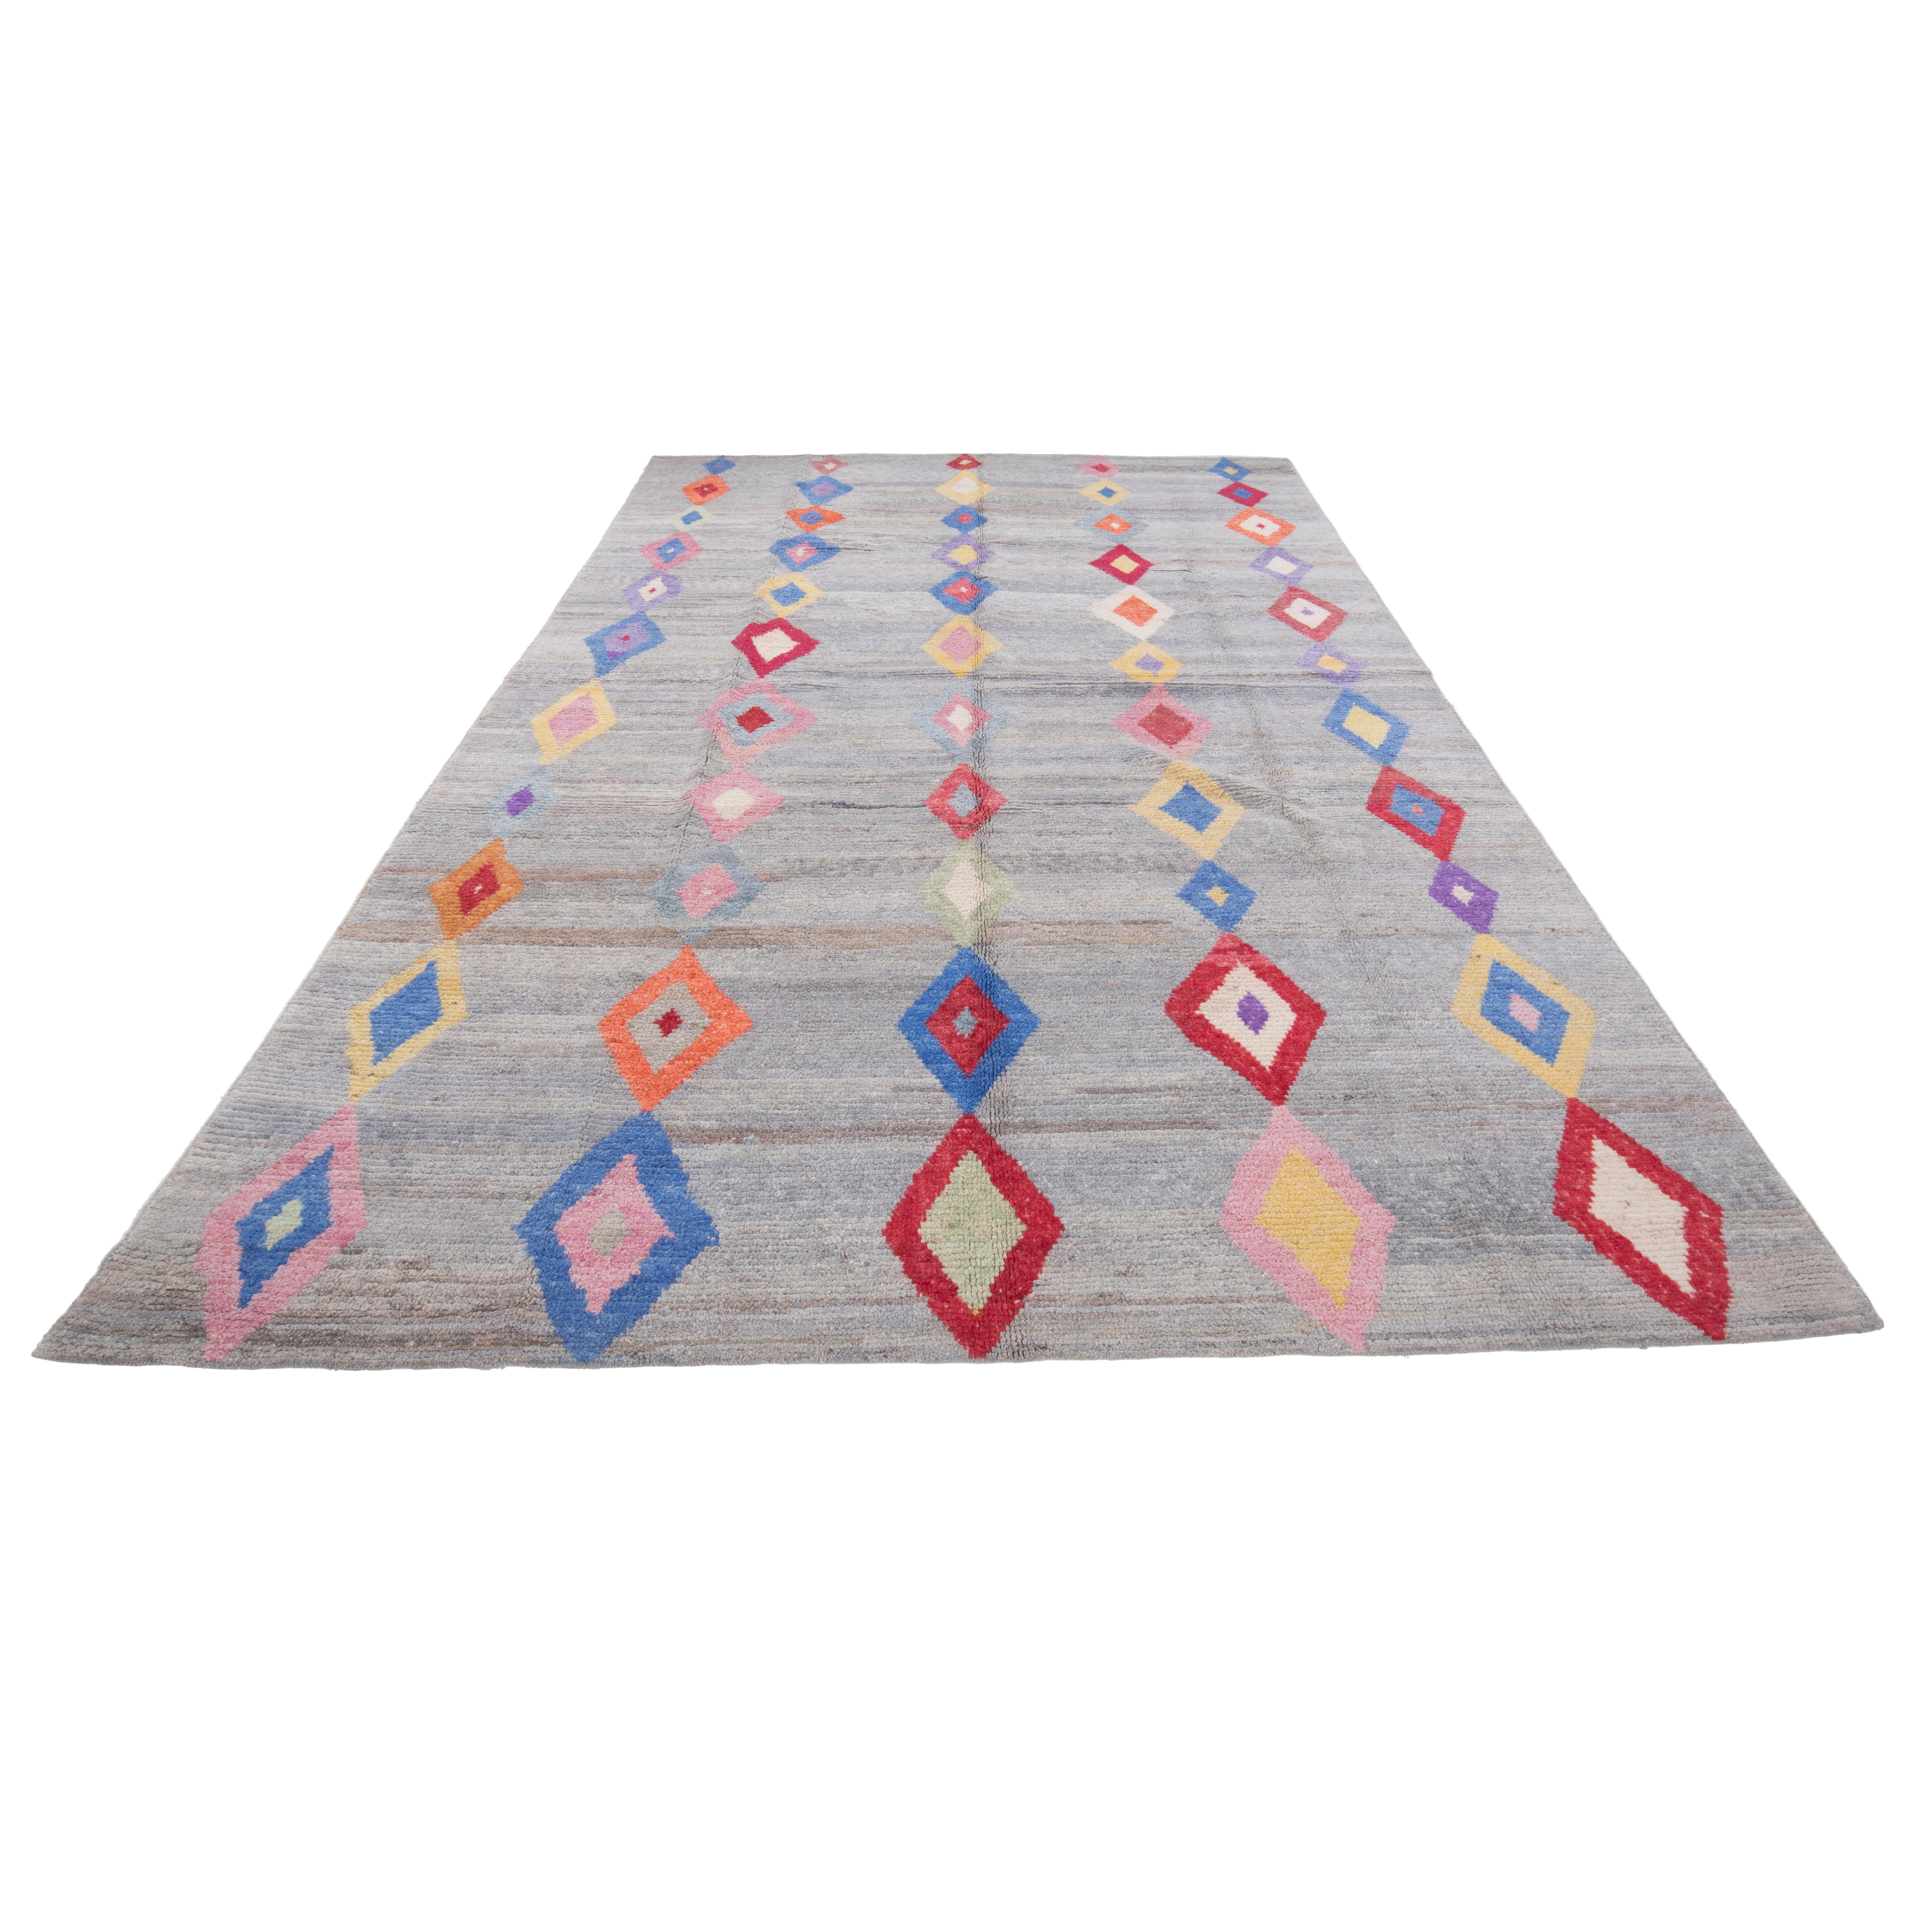 Contemporary Turkish rugs made with recycled wool are an excellent example of sustainable and eco-friendly home decor. These rugs are made using recycled wool yarn, which is obtained from various vintage, old and heavily damaged weavings.
The